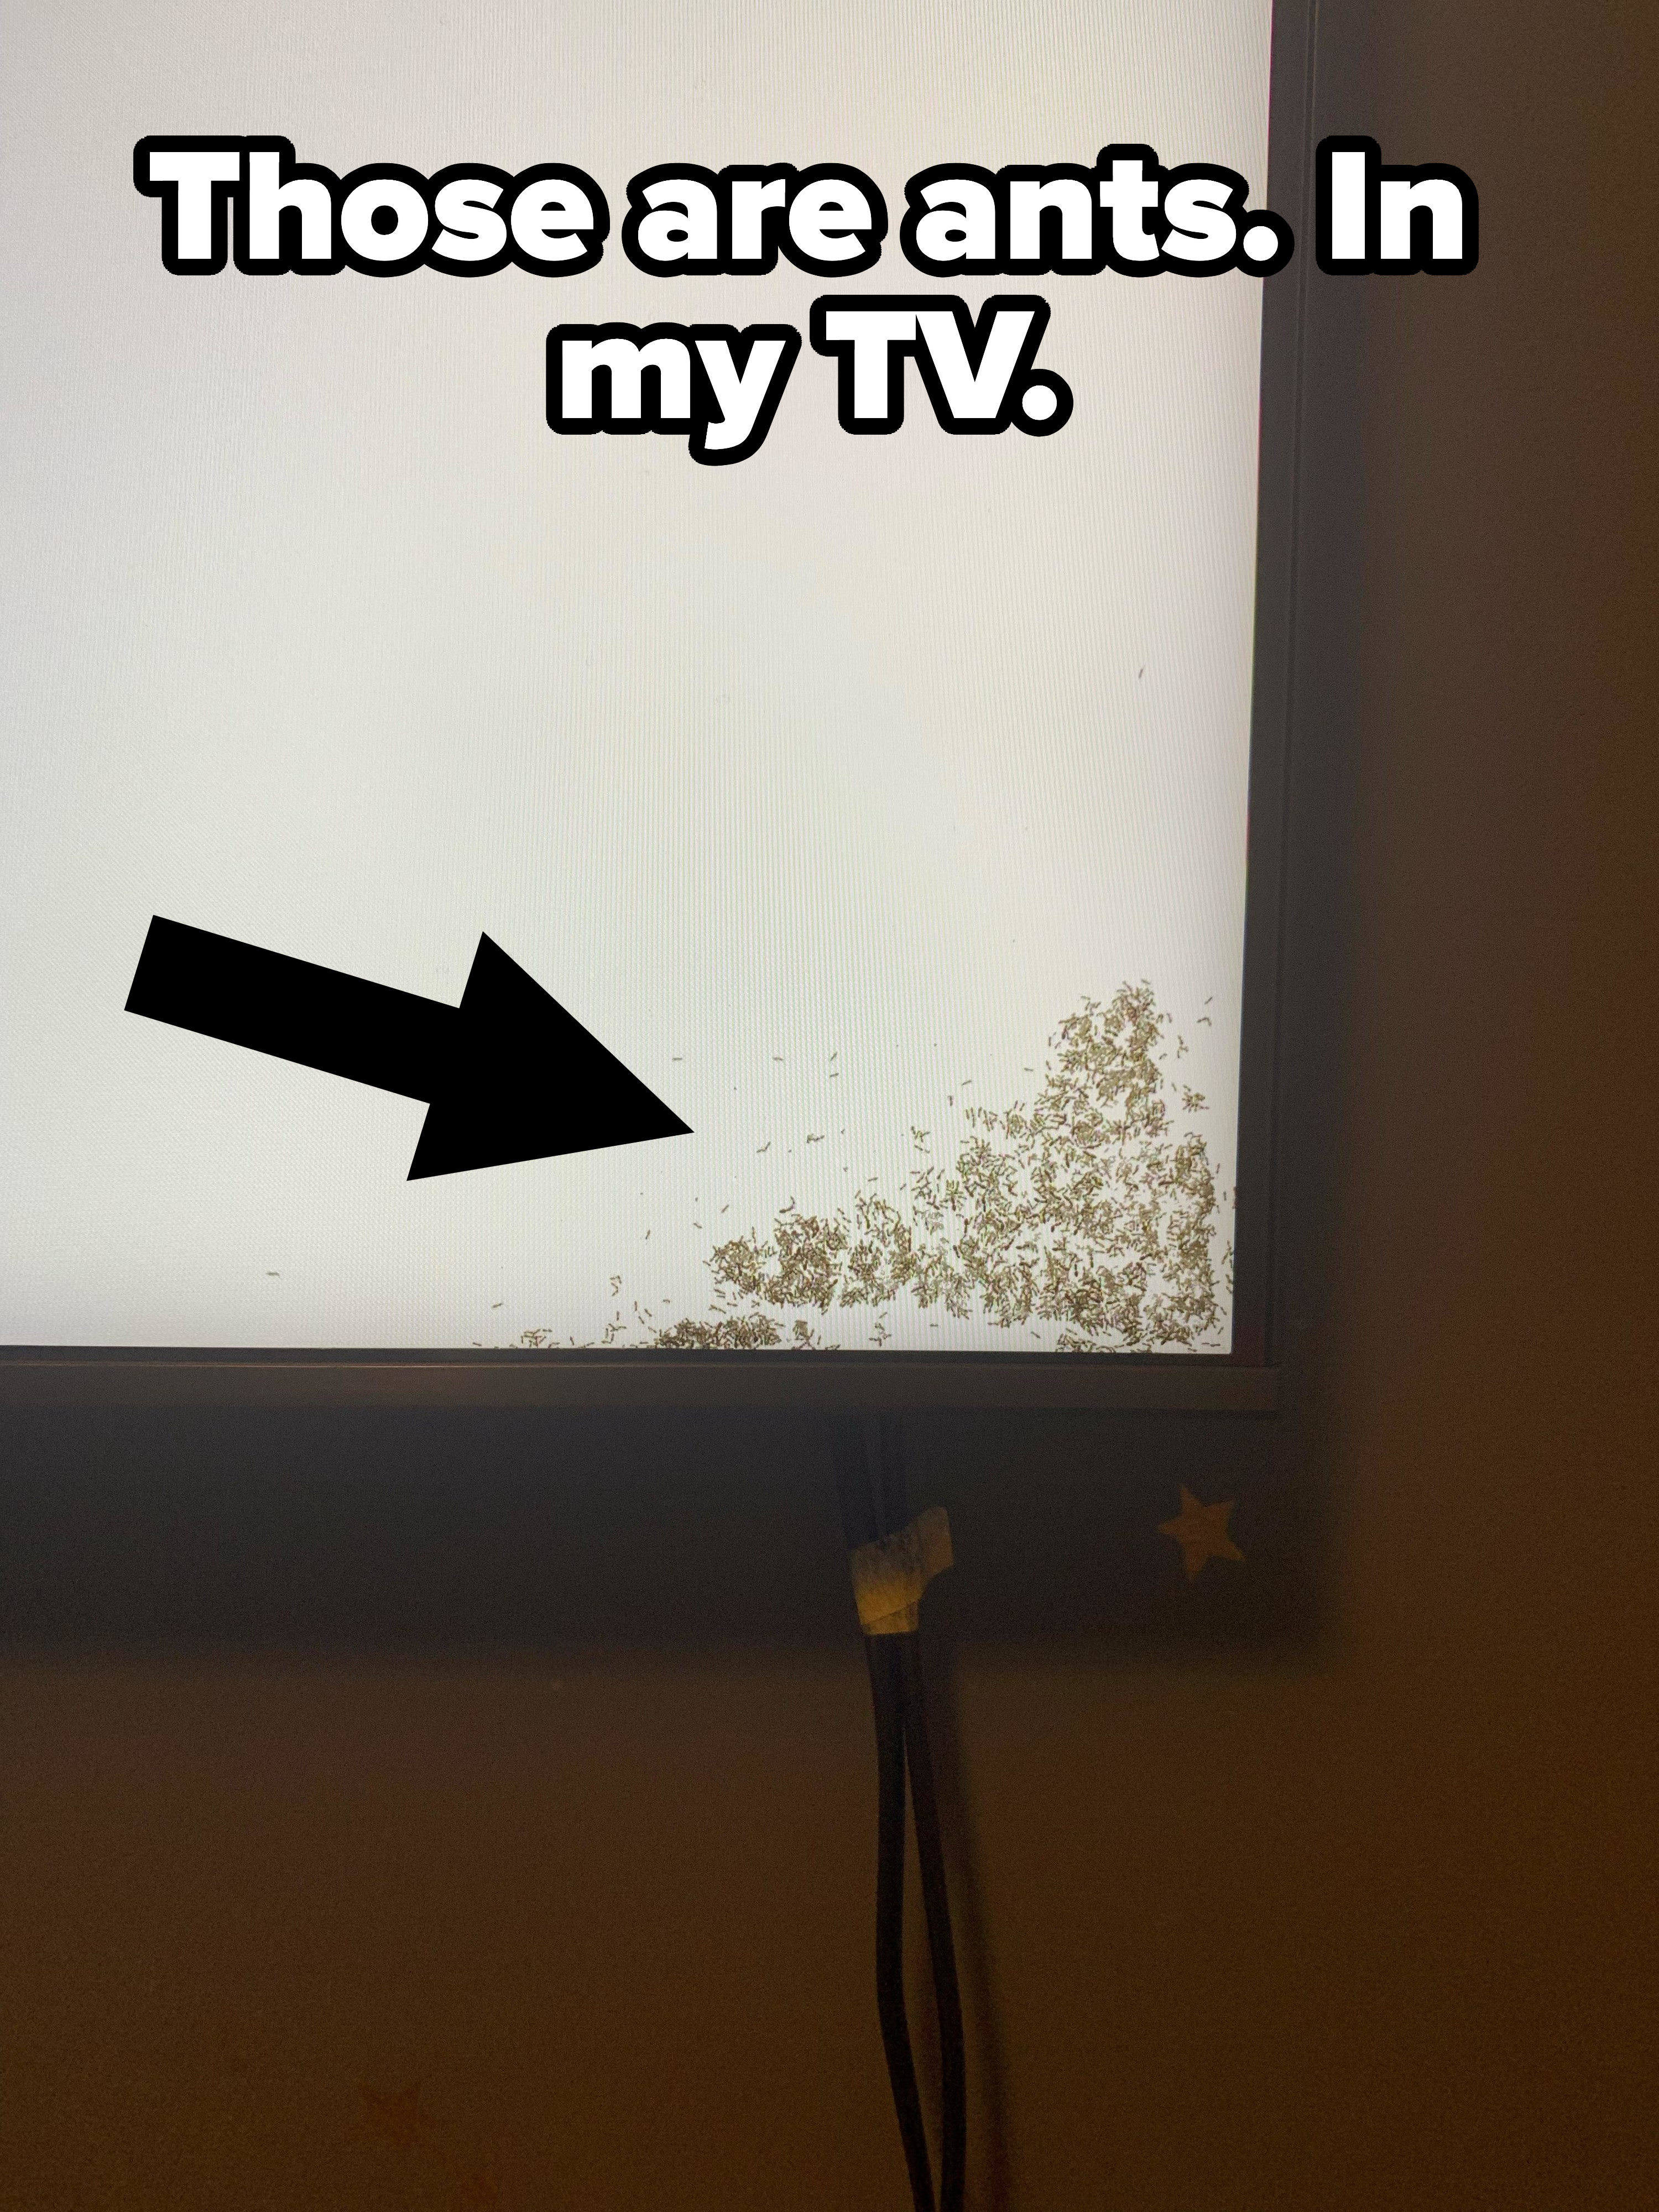 Arrow pointing to ants inside a TV screen